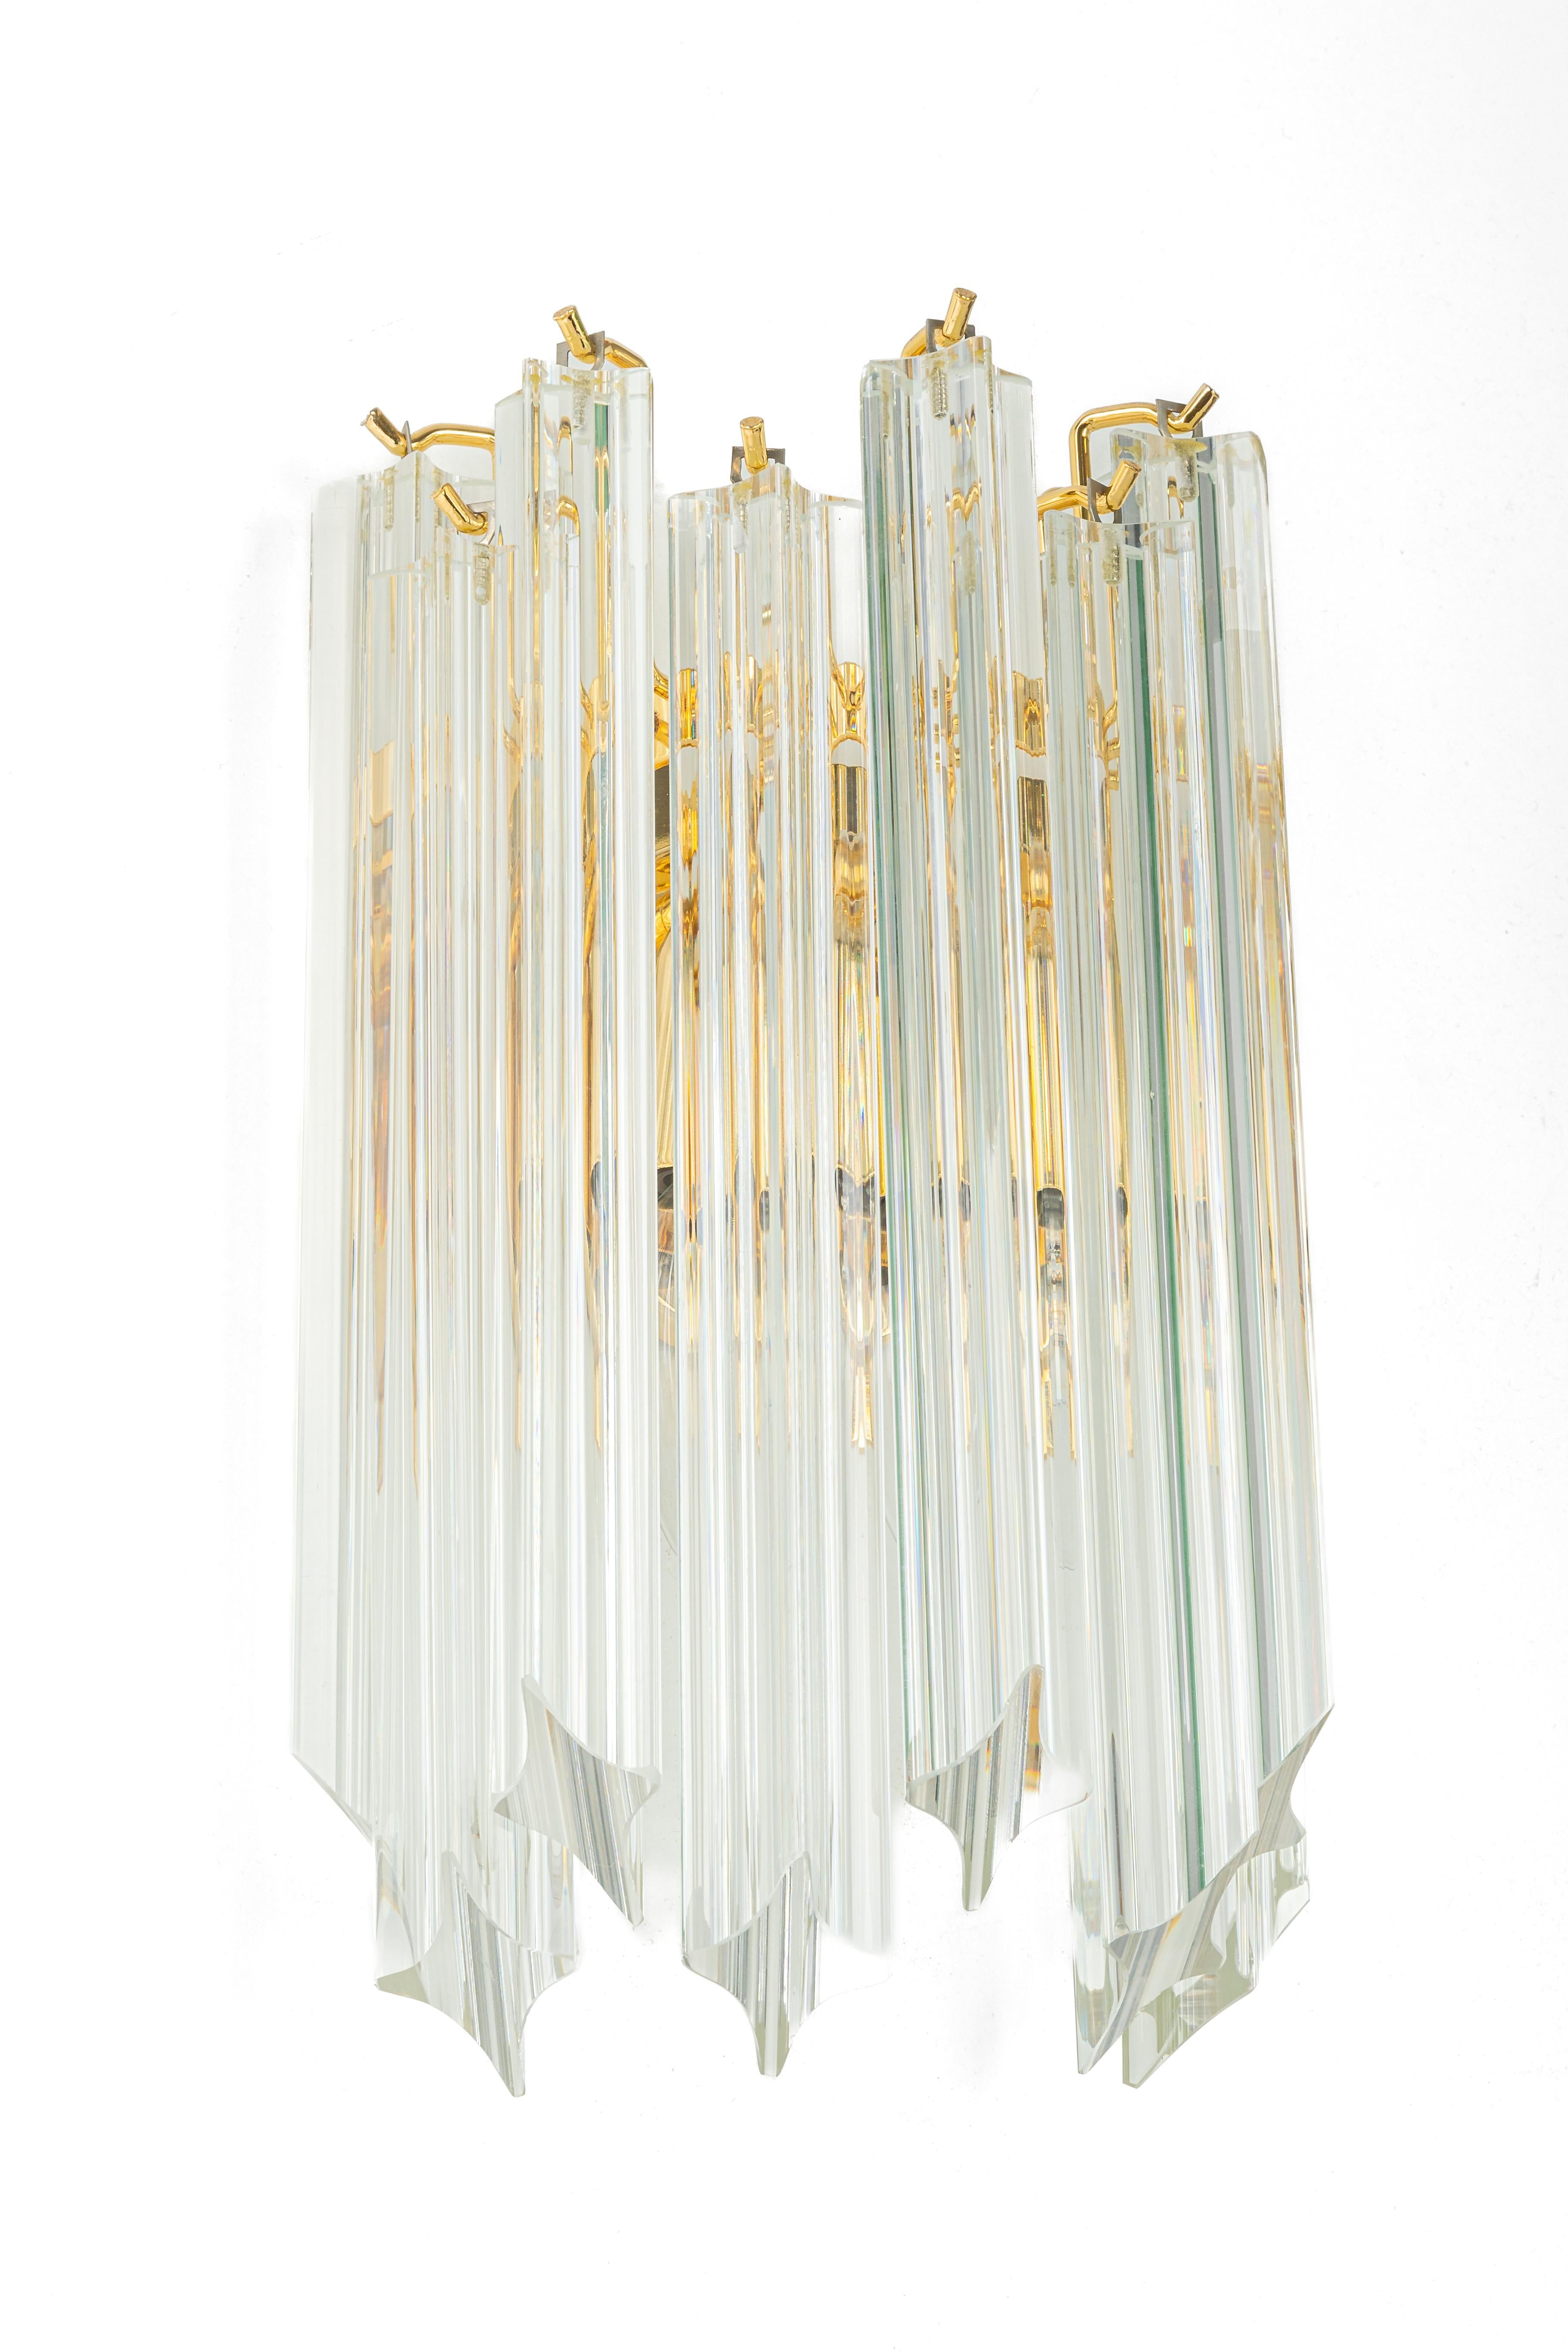 Each wall light is composed of 9 crystal glasses and a gilt brass frame design in Venini style, Italy. Manufactured circa 1980s.
High quality and in very good condition. Cleaned, well-wired, and ready to use. 

Each fixture requires two small